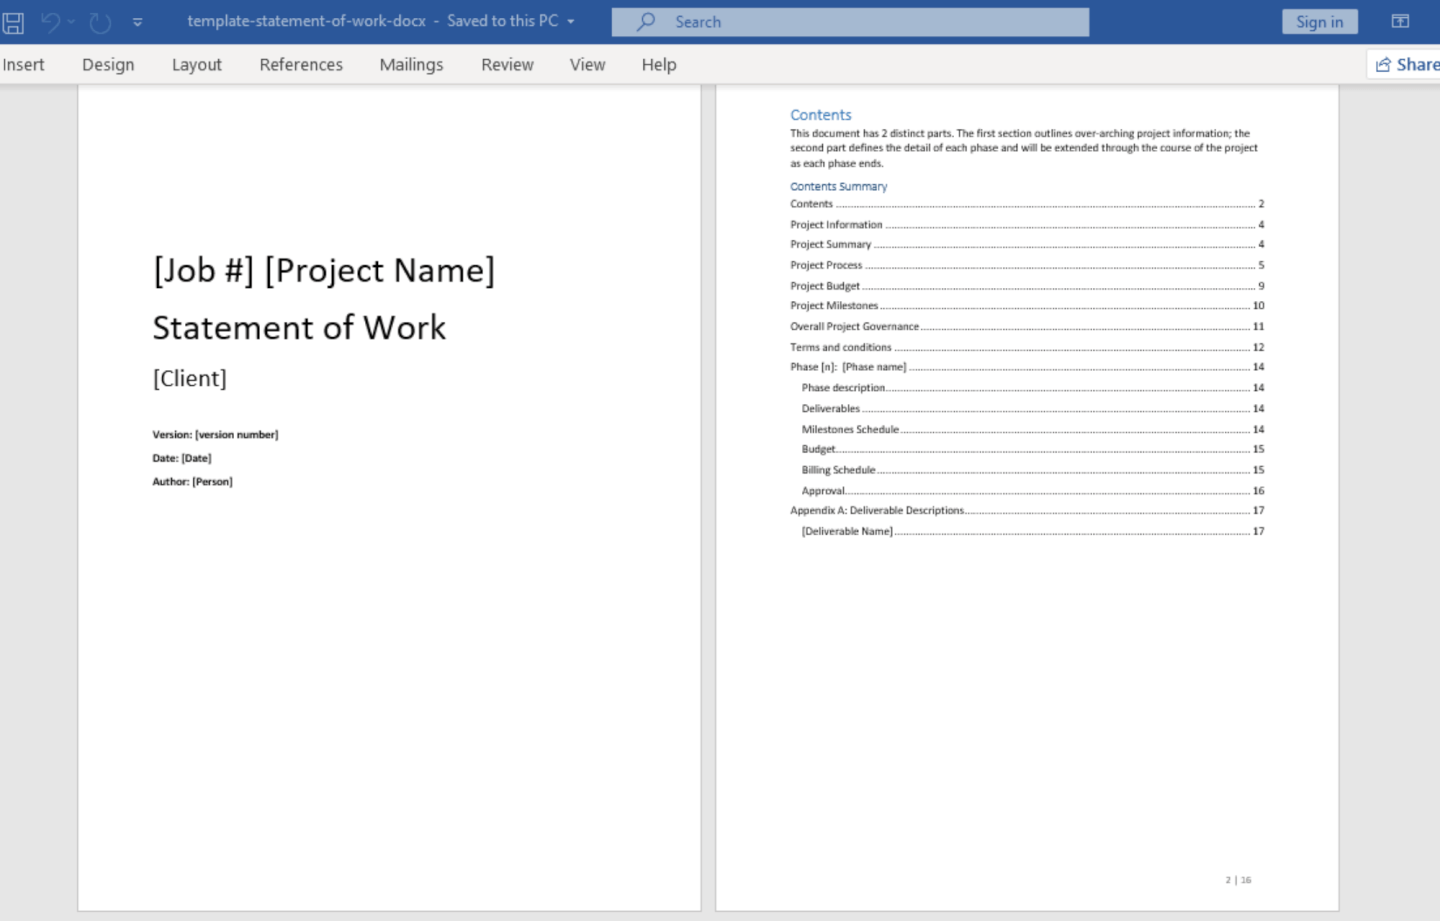 How To Write A Project Statement Of Work: Template & Example